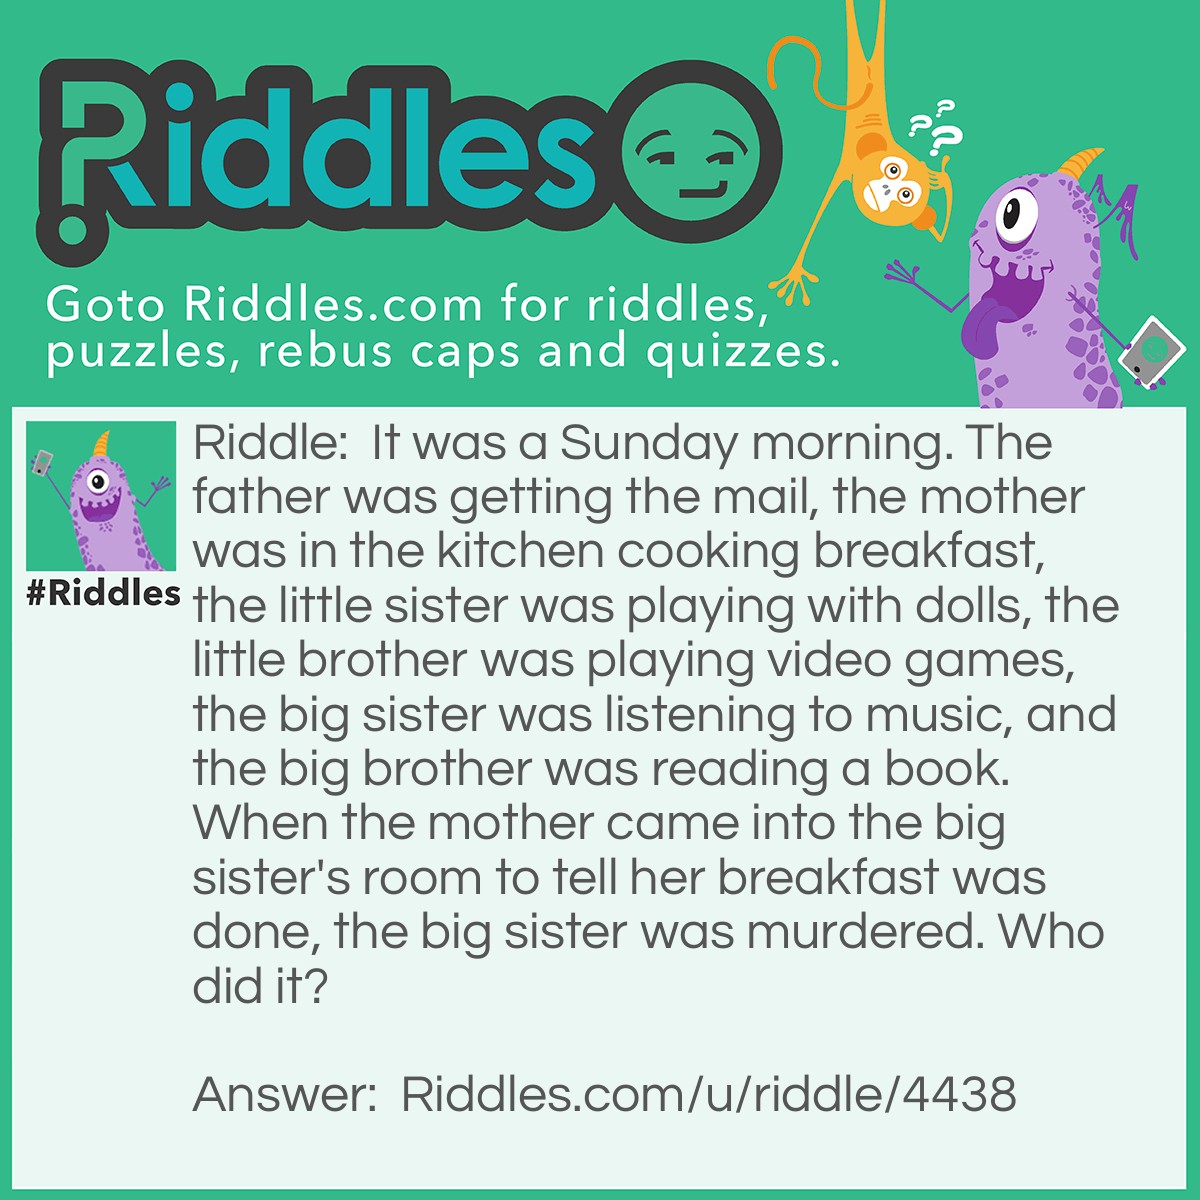 Riddle: It was a Sunday morning. The father was getting the mail, the mother was in the kitchen cooking breakfast, the little sister was playing with dolls, the little brother was playing video games, the big sister was listening to music, and the big brother was reading a book. When the mother came into the big sister's room to tell her breakfast was done, the big sister was murdered. Who did it? Answer: The father.